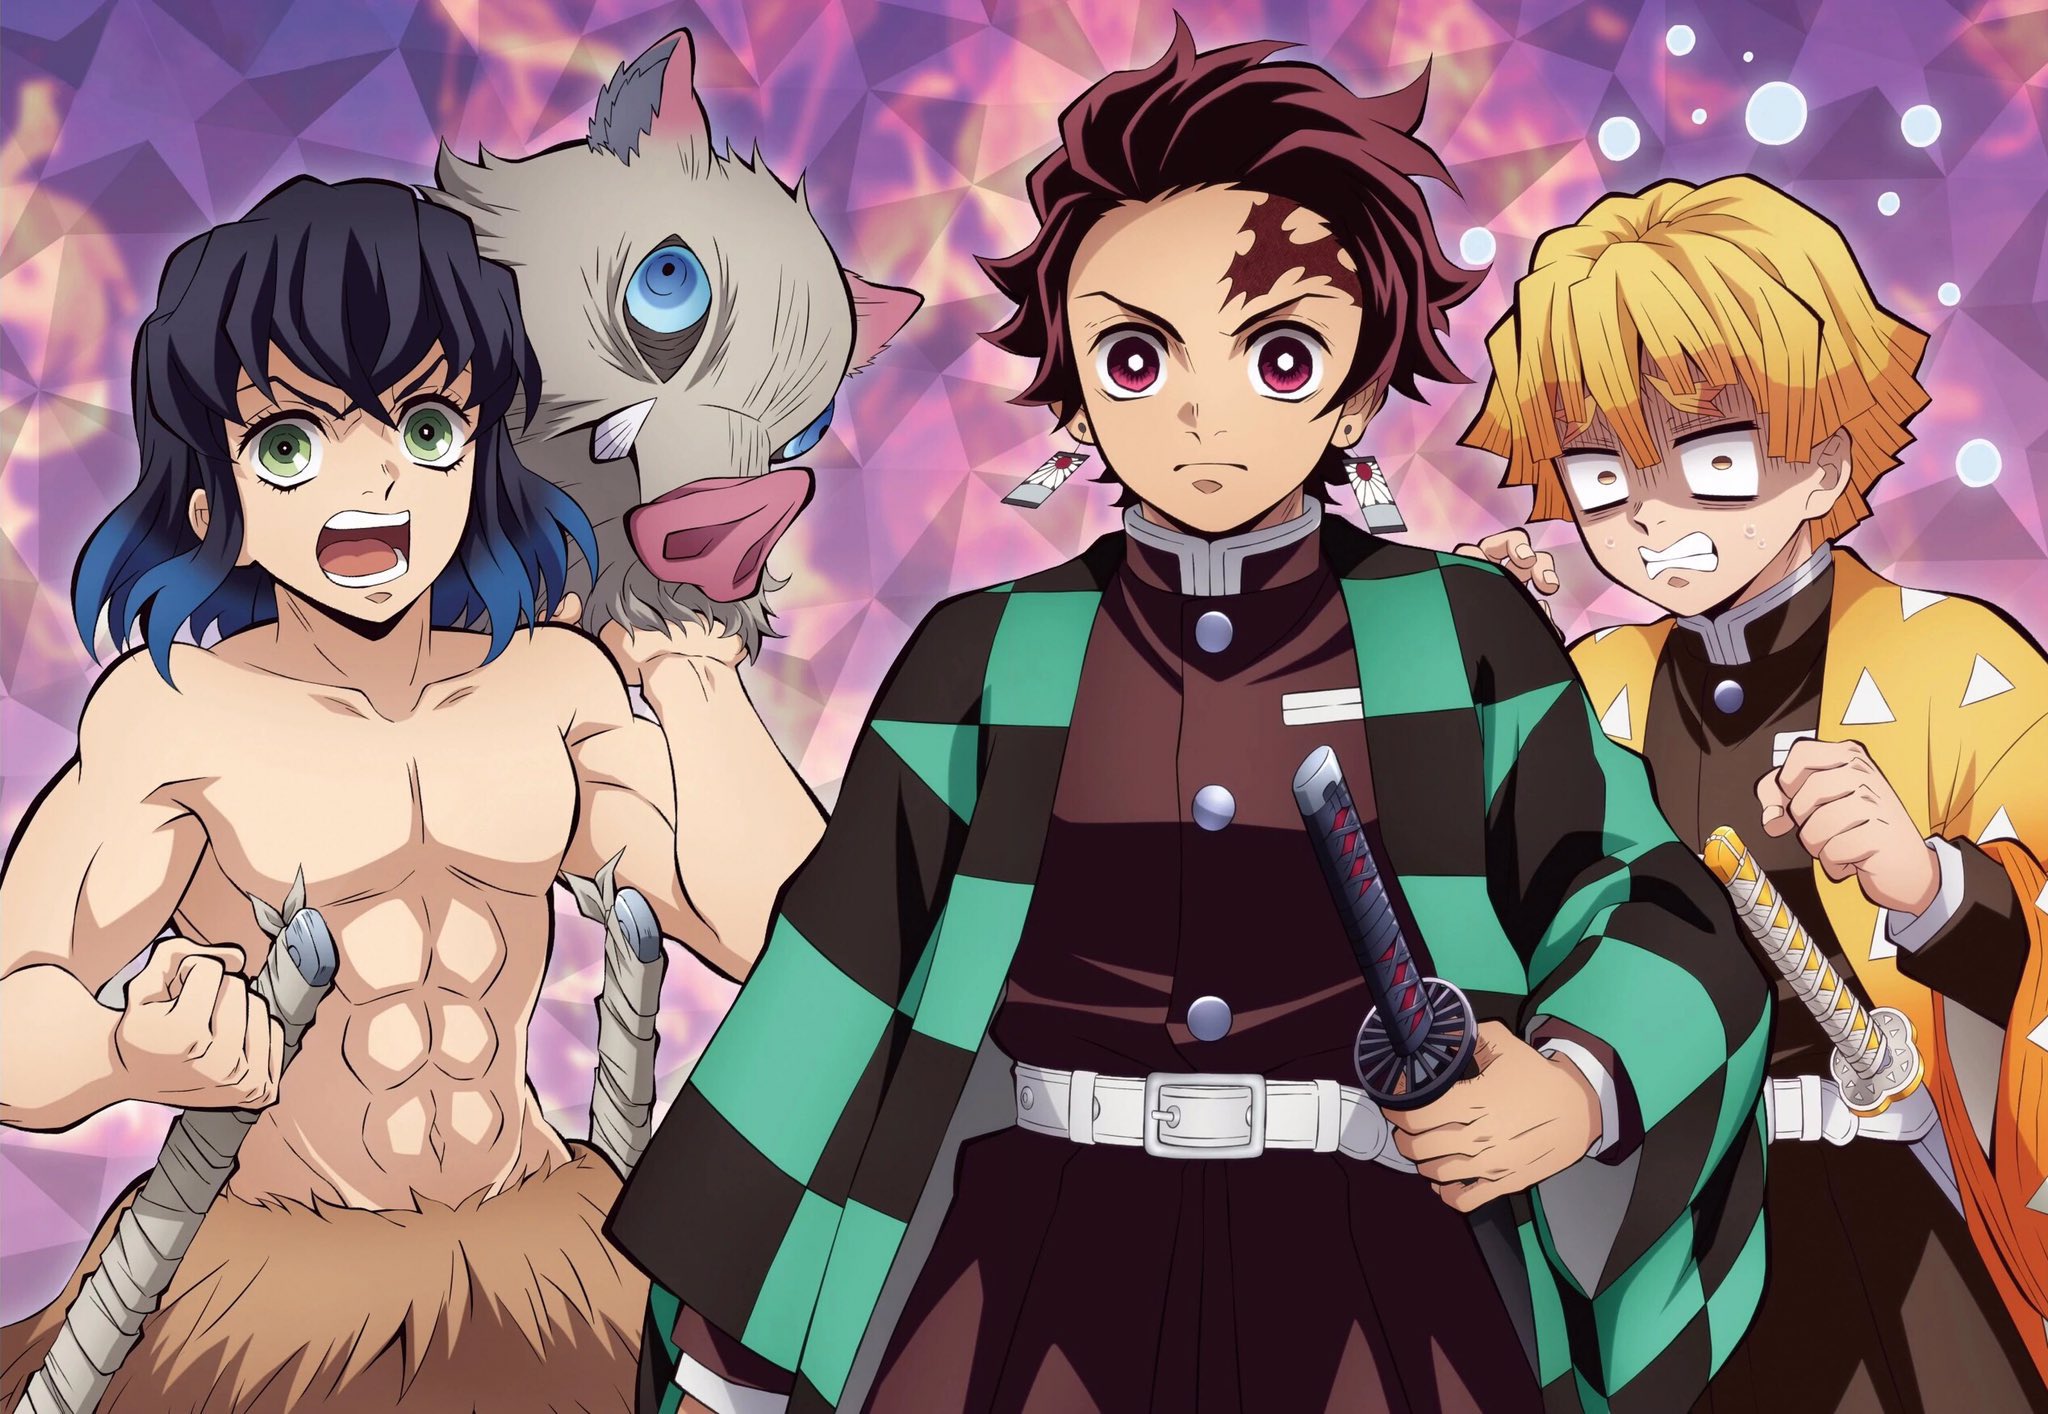 Crunchyroll on X: NEWS: Demon Slayer TV Anime 2nd Anniversary Event Moves  Online, More Information on the Anime to Be Announced ✨ More:    / X